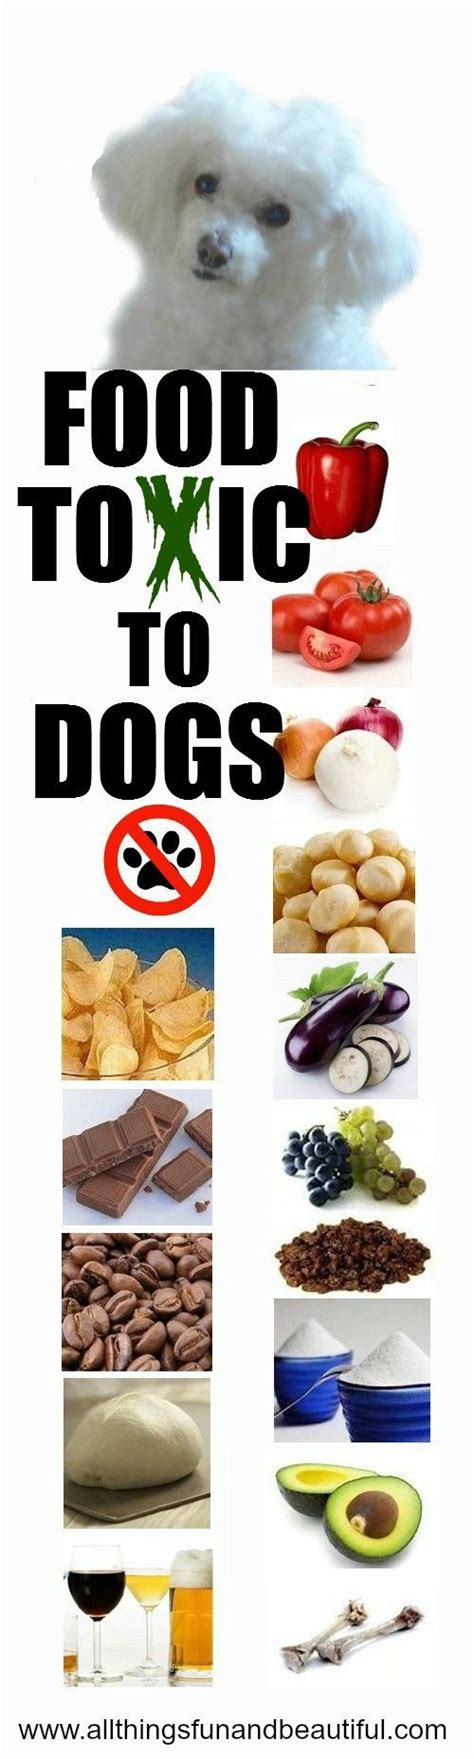 Small animal clinic starter site 7606 third ave brooklyn ny 11209. View the list of poisonous foods to avoid, including ...